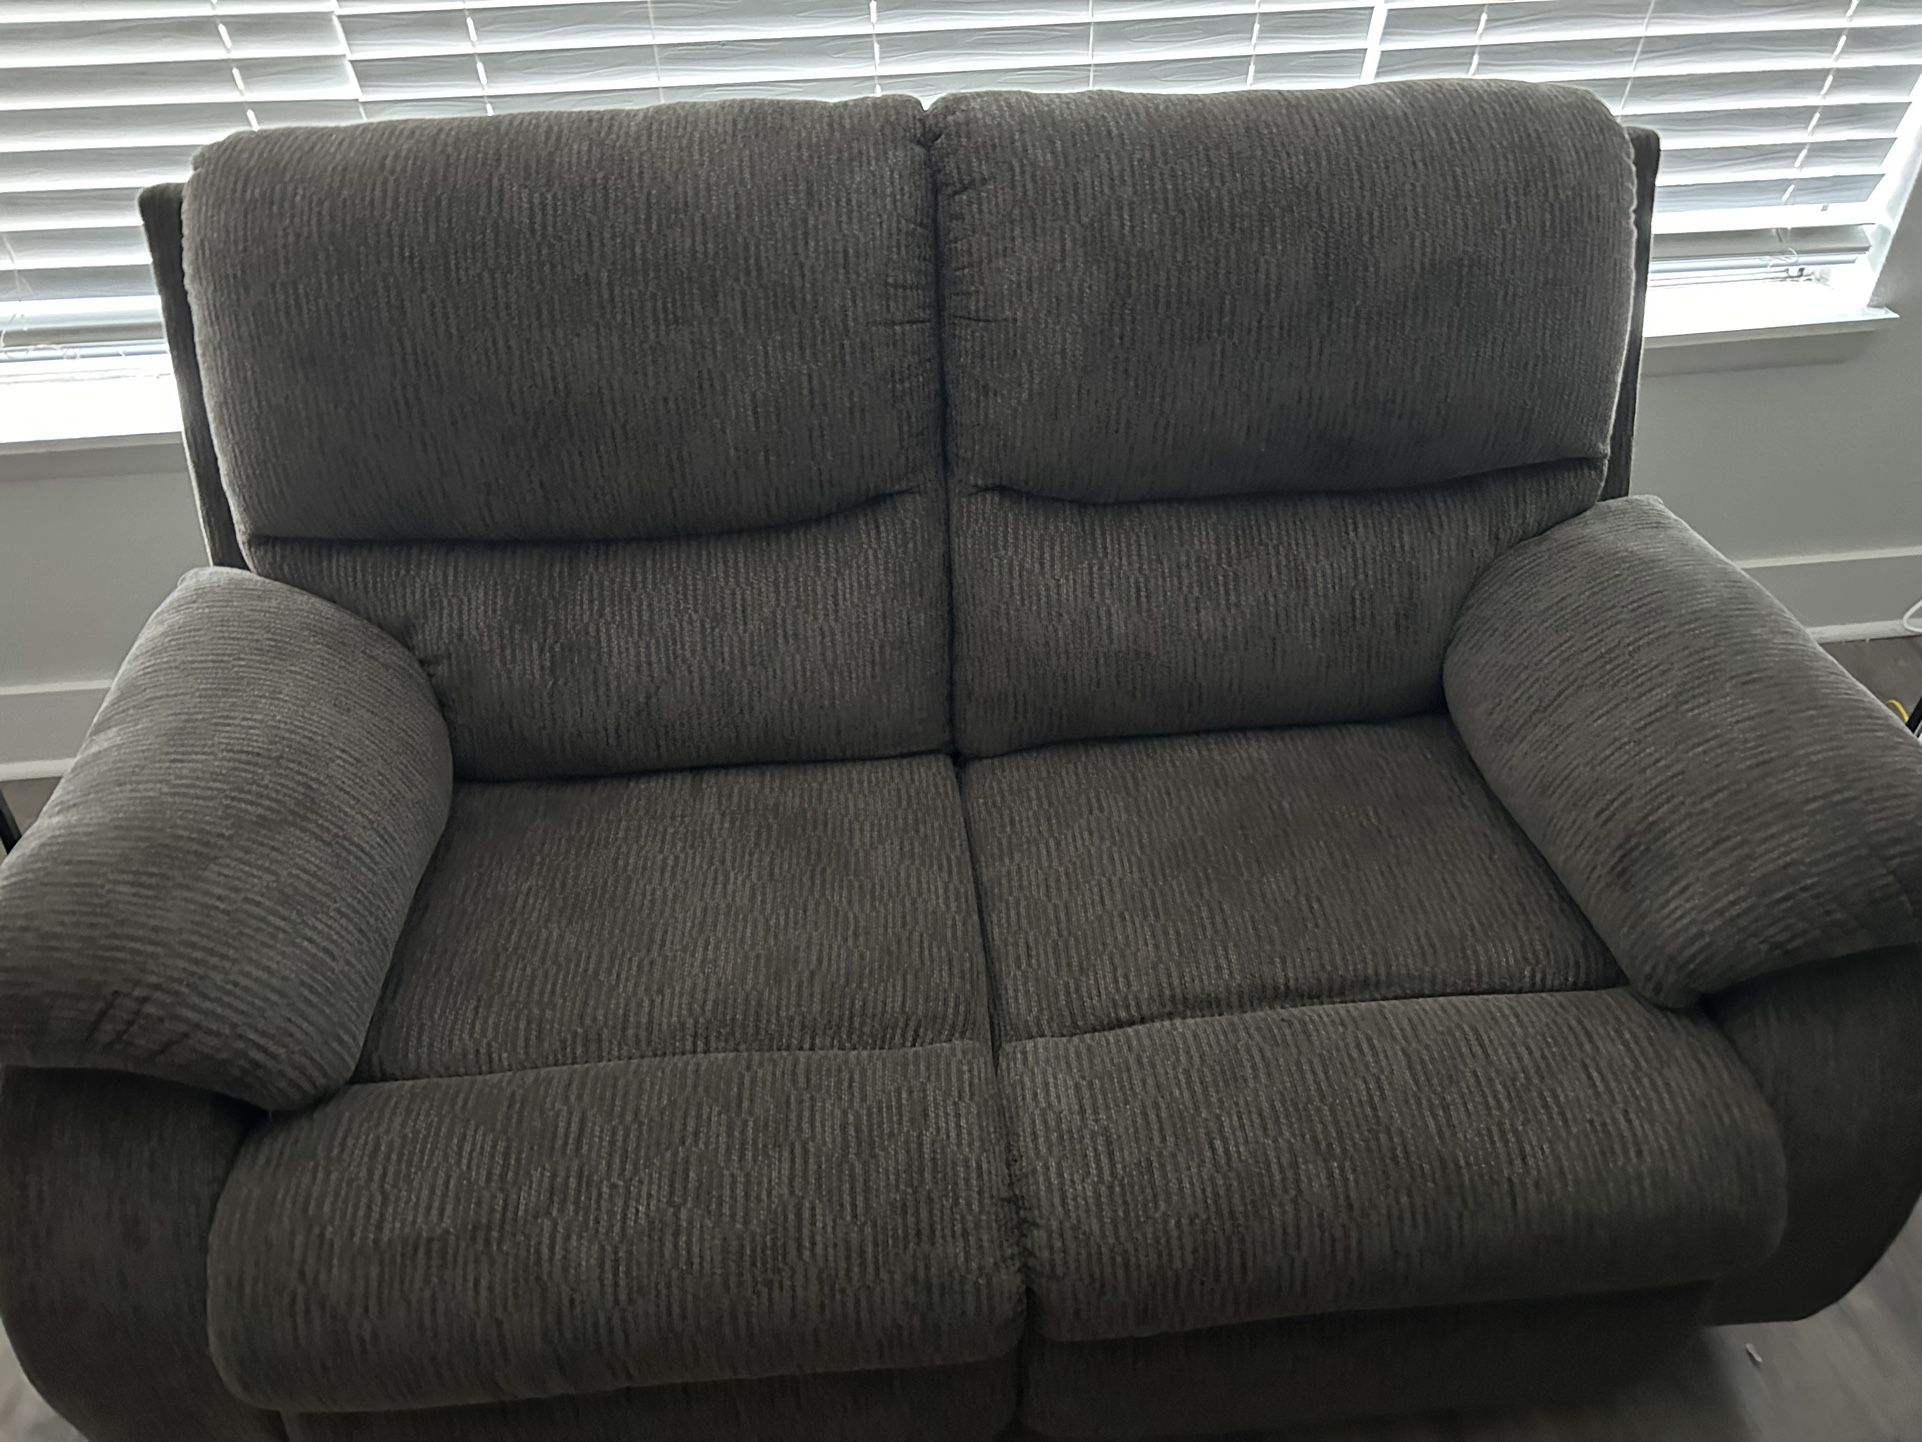 Recliner couches